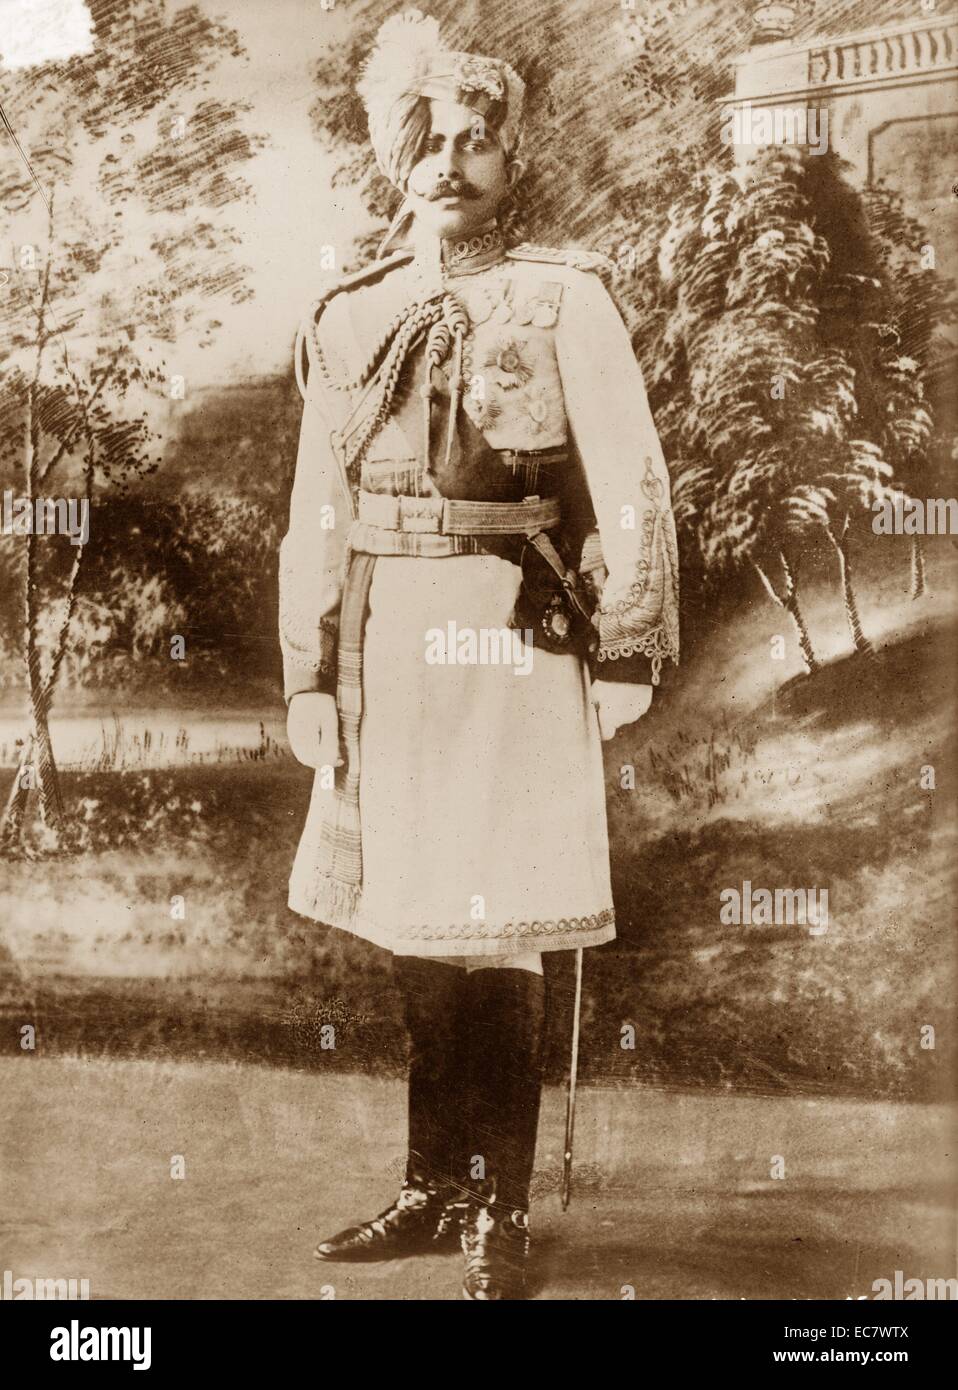 General Sir Ganga Singh (1880-1943), the Maharaja of the state of Bikaner, India. He served in the British Imperial War Cabinet during World War I as its only non-Anglo member. Stock Photo